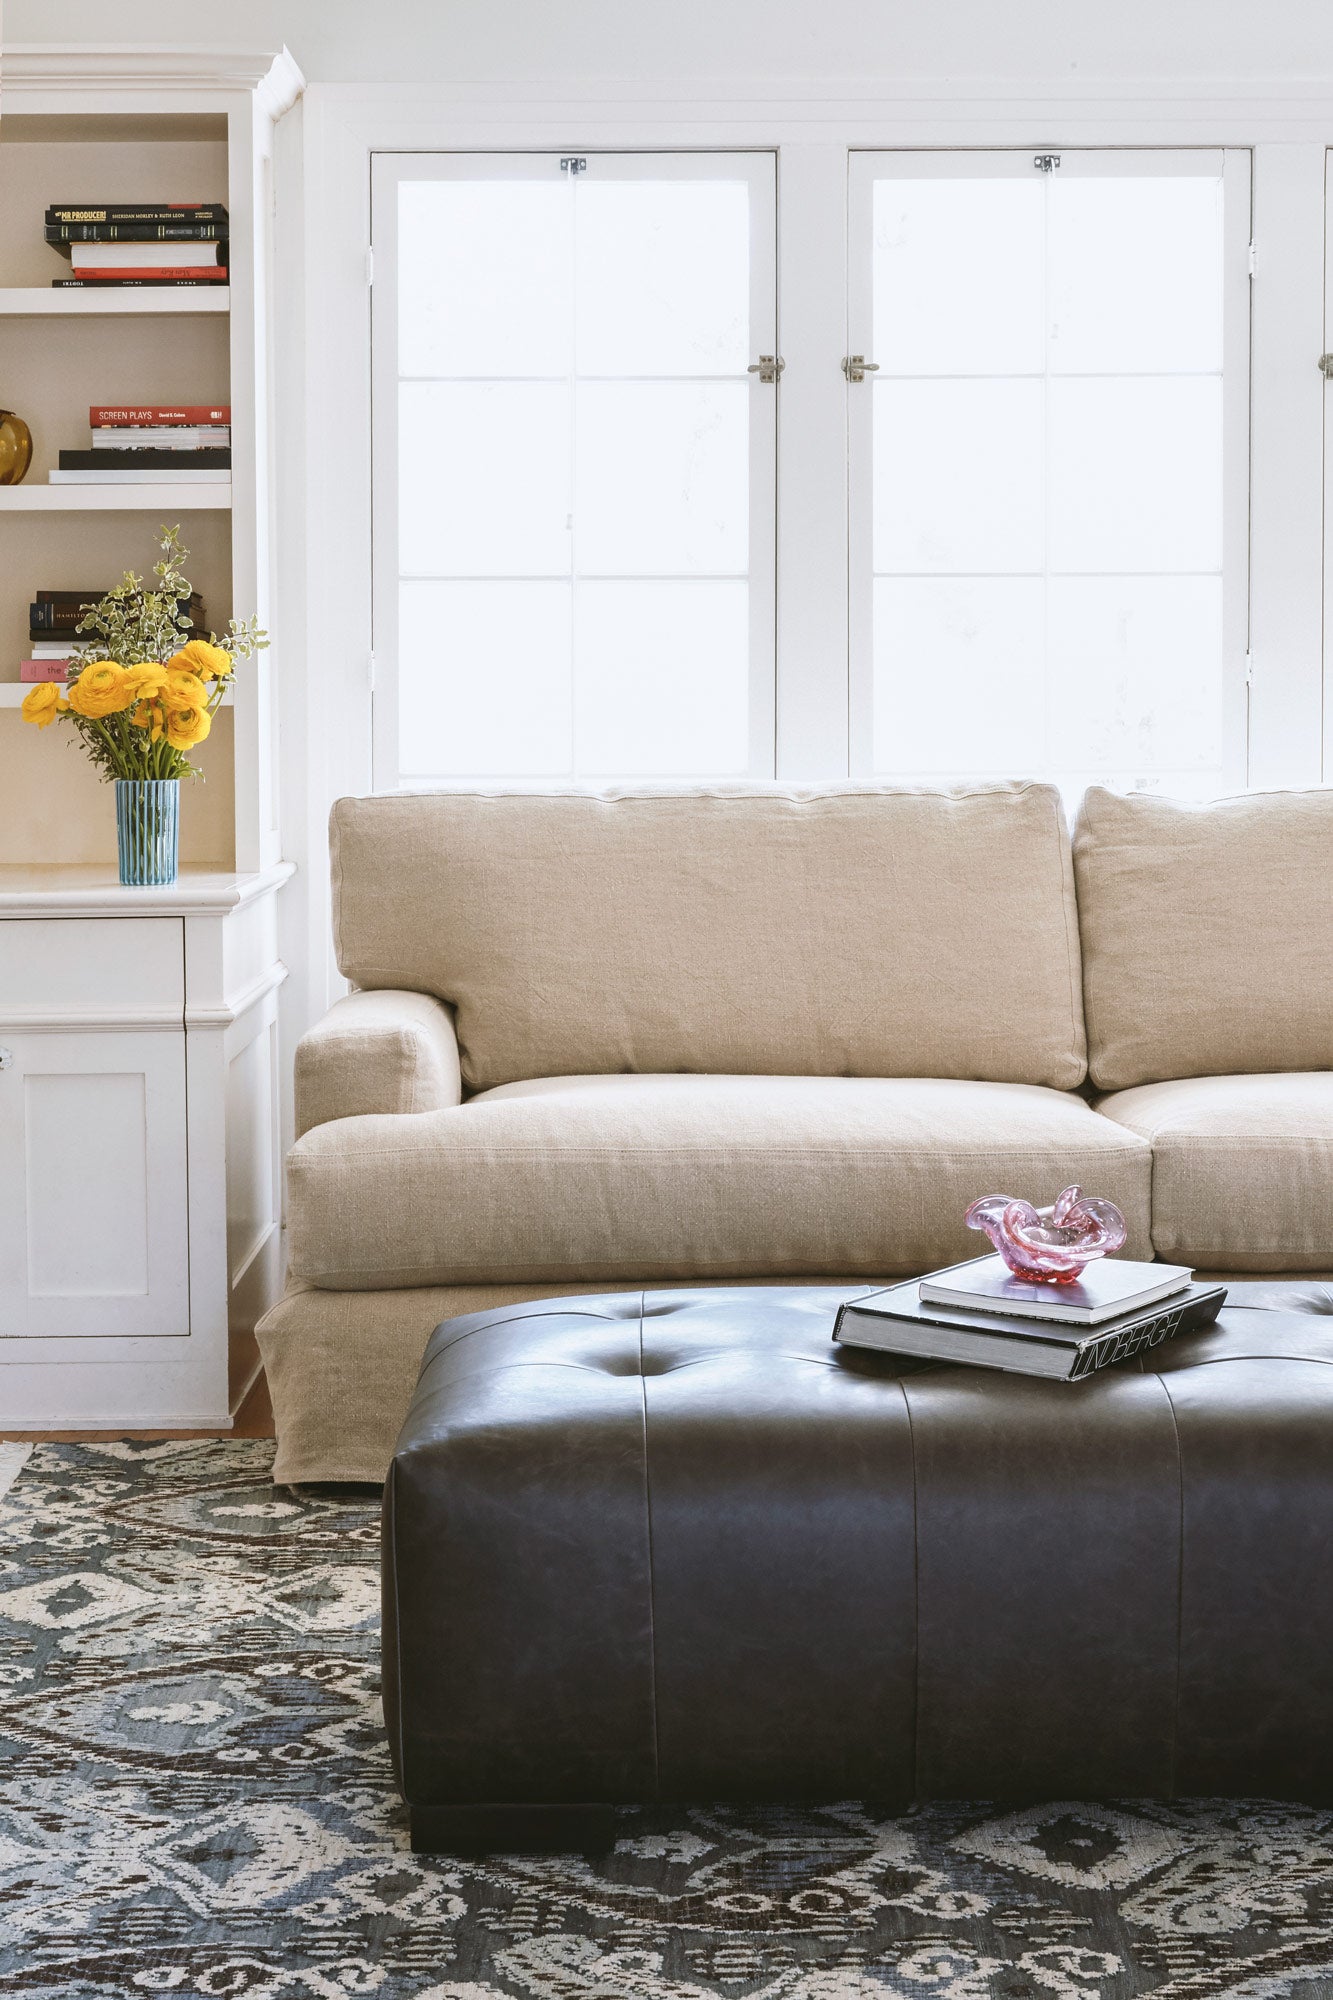  Daylight in a living room with a sofa in natural color linen in front of a window. A dark grey leather tufted ottoman sits in front of the sofa, on a blue, grey and white rug. There is a bookcase on the left side of the sofa. Photographed in Brevard Burlap. 